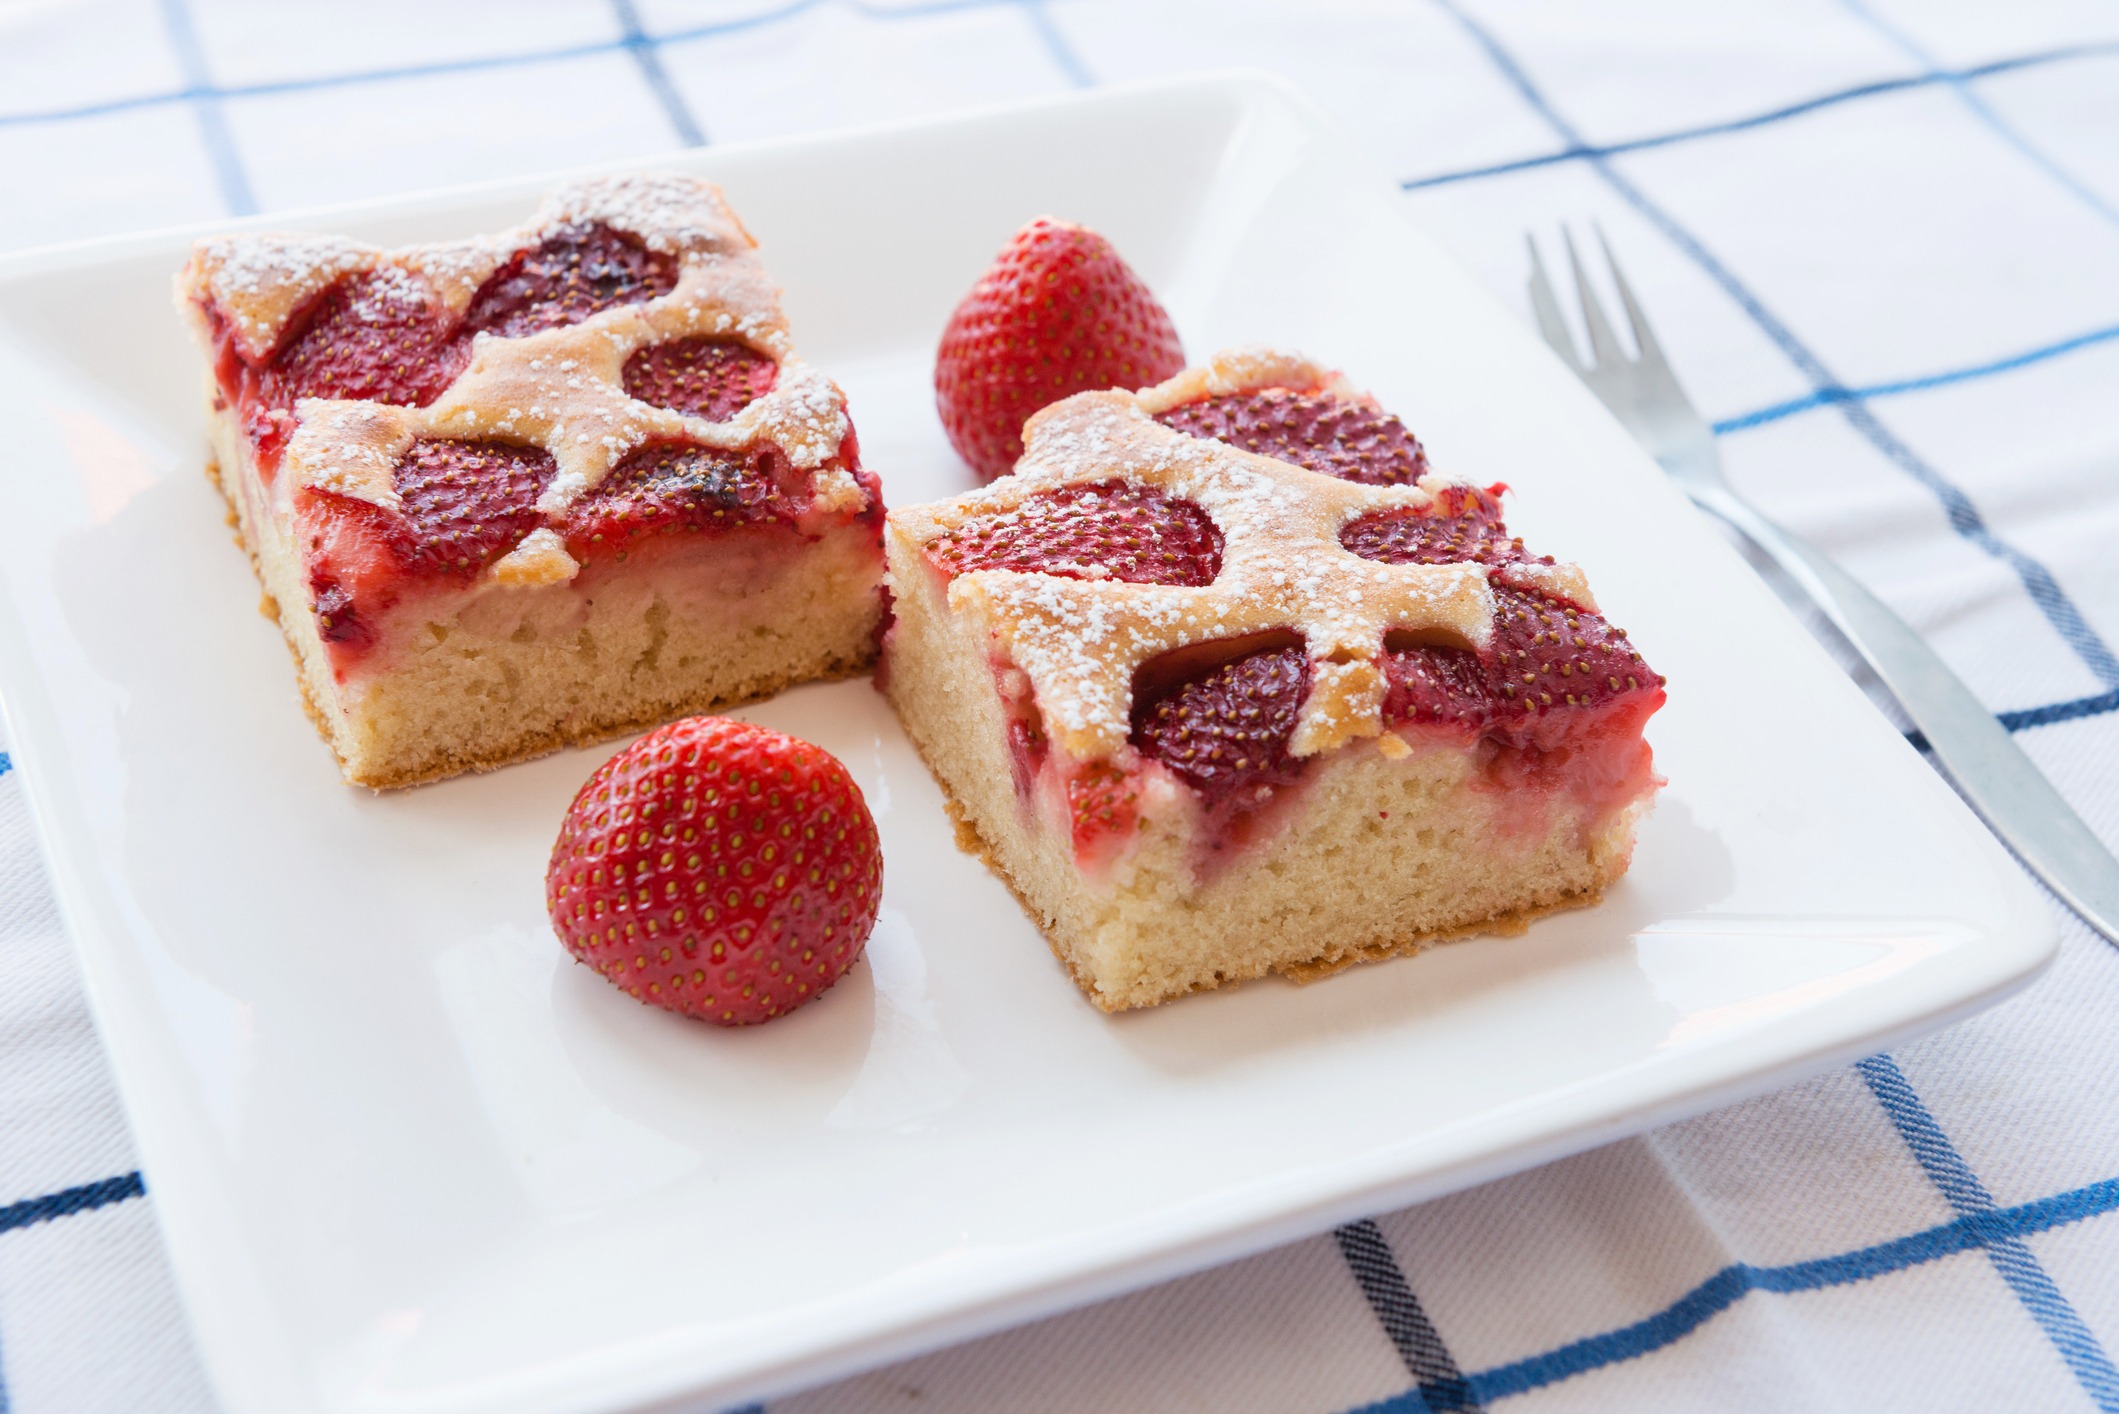 strawberry cake with fresh strawberries served on white plate